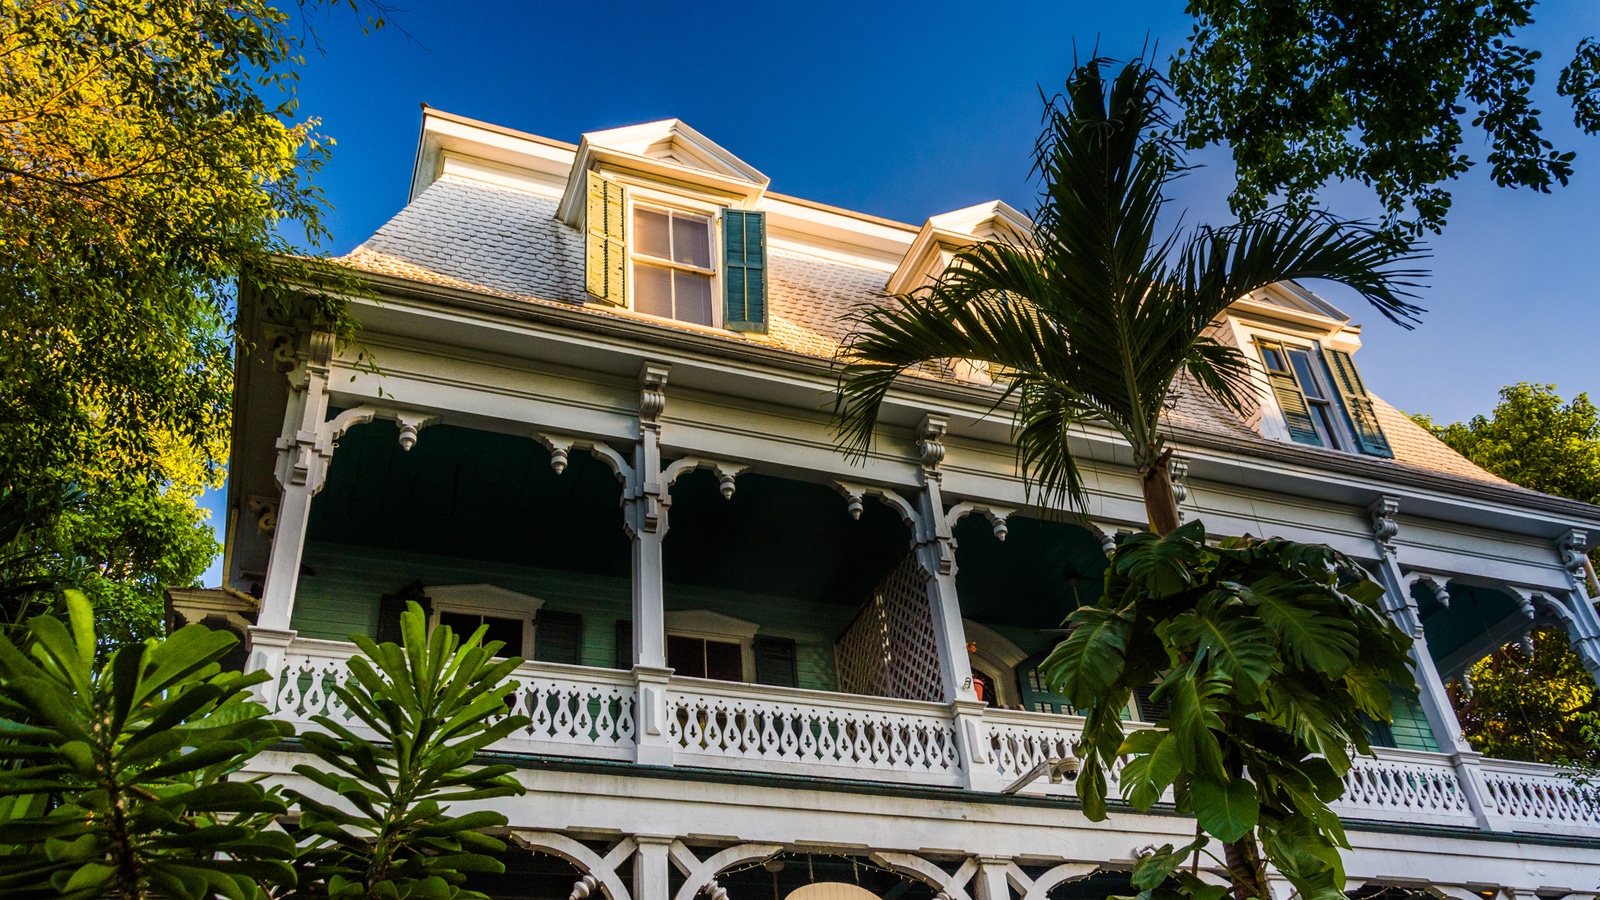 An old House In Key West